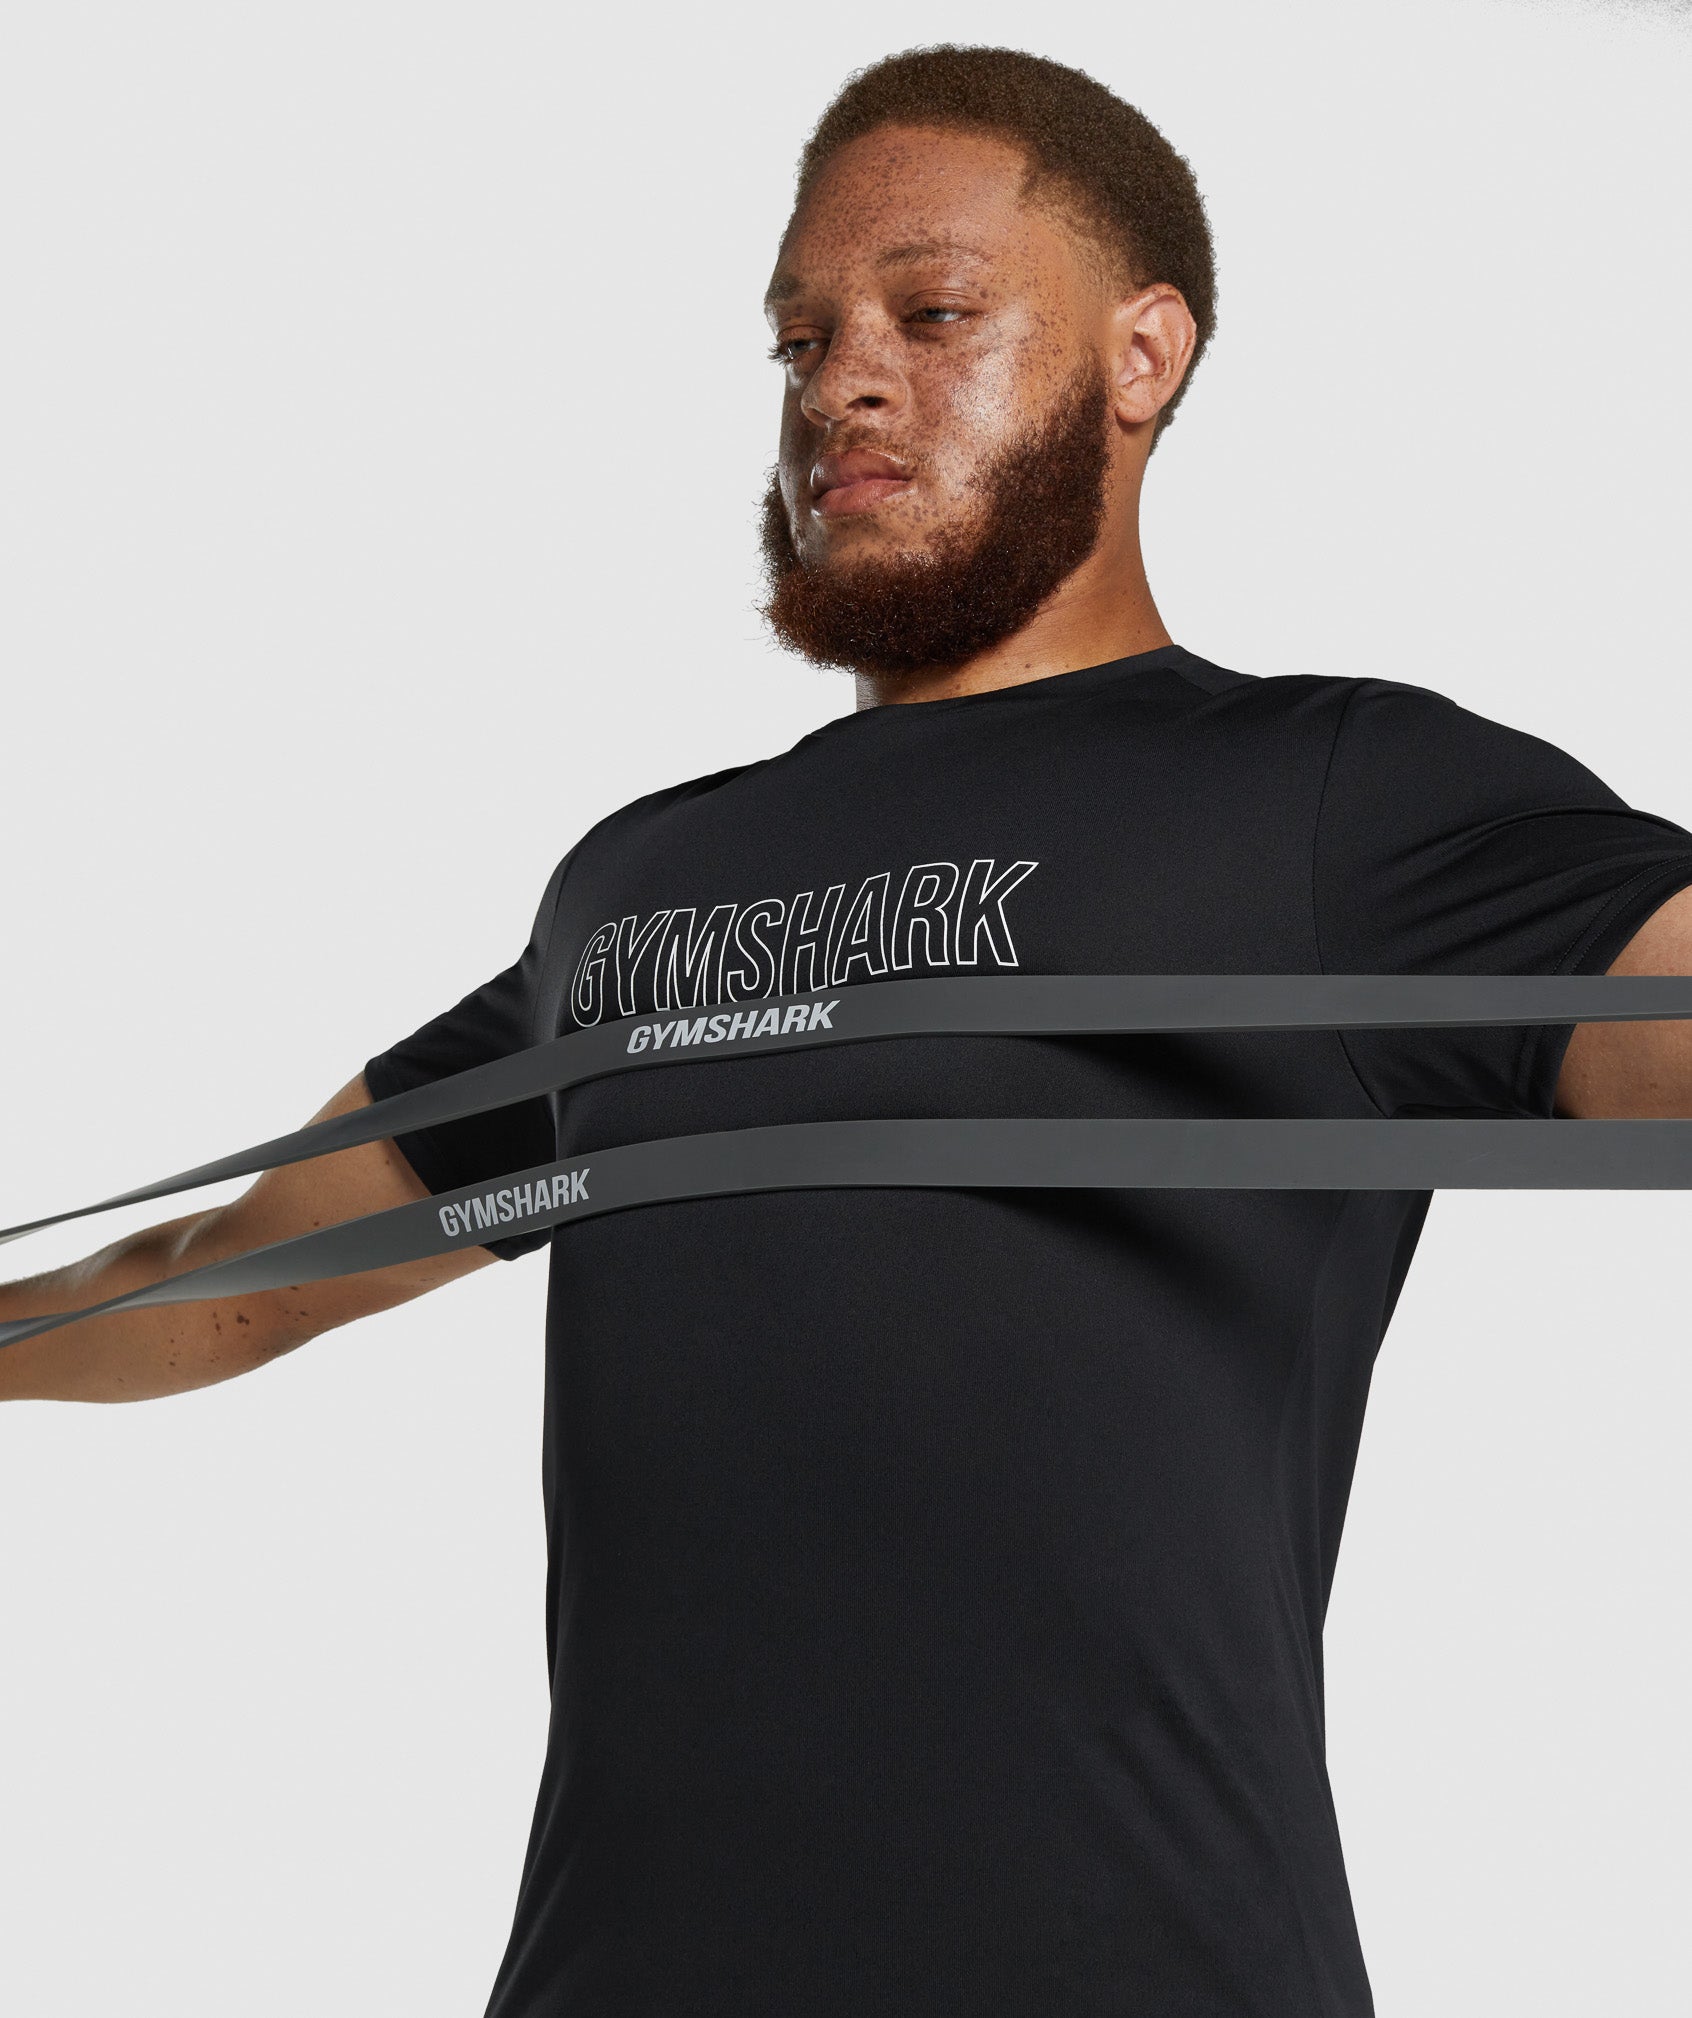 11kg to 36kg Resistance Band product image 3